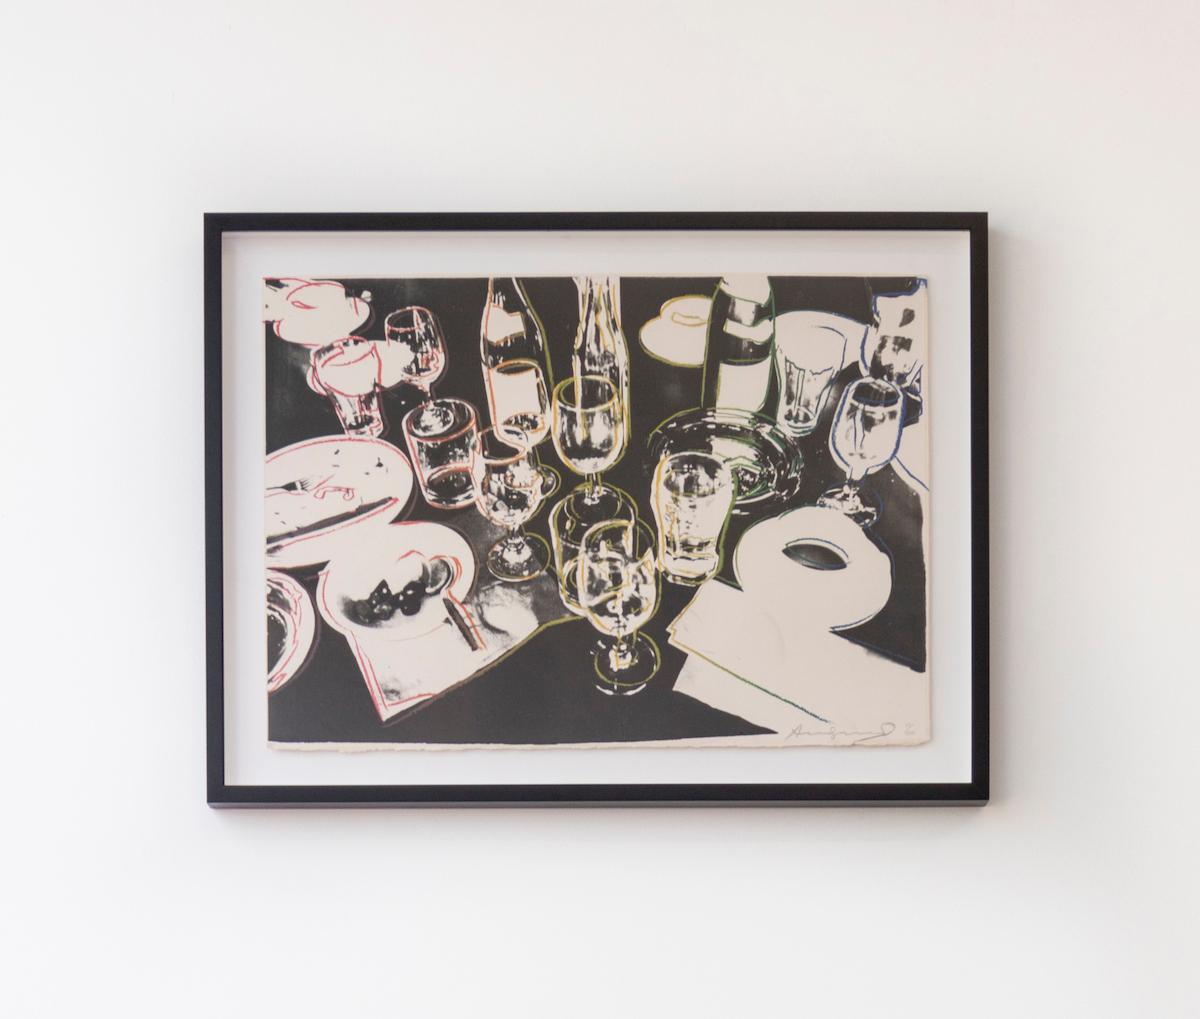 After The Party (FS II.183)  - Print by Andy Warhol